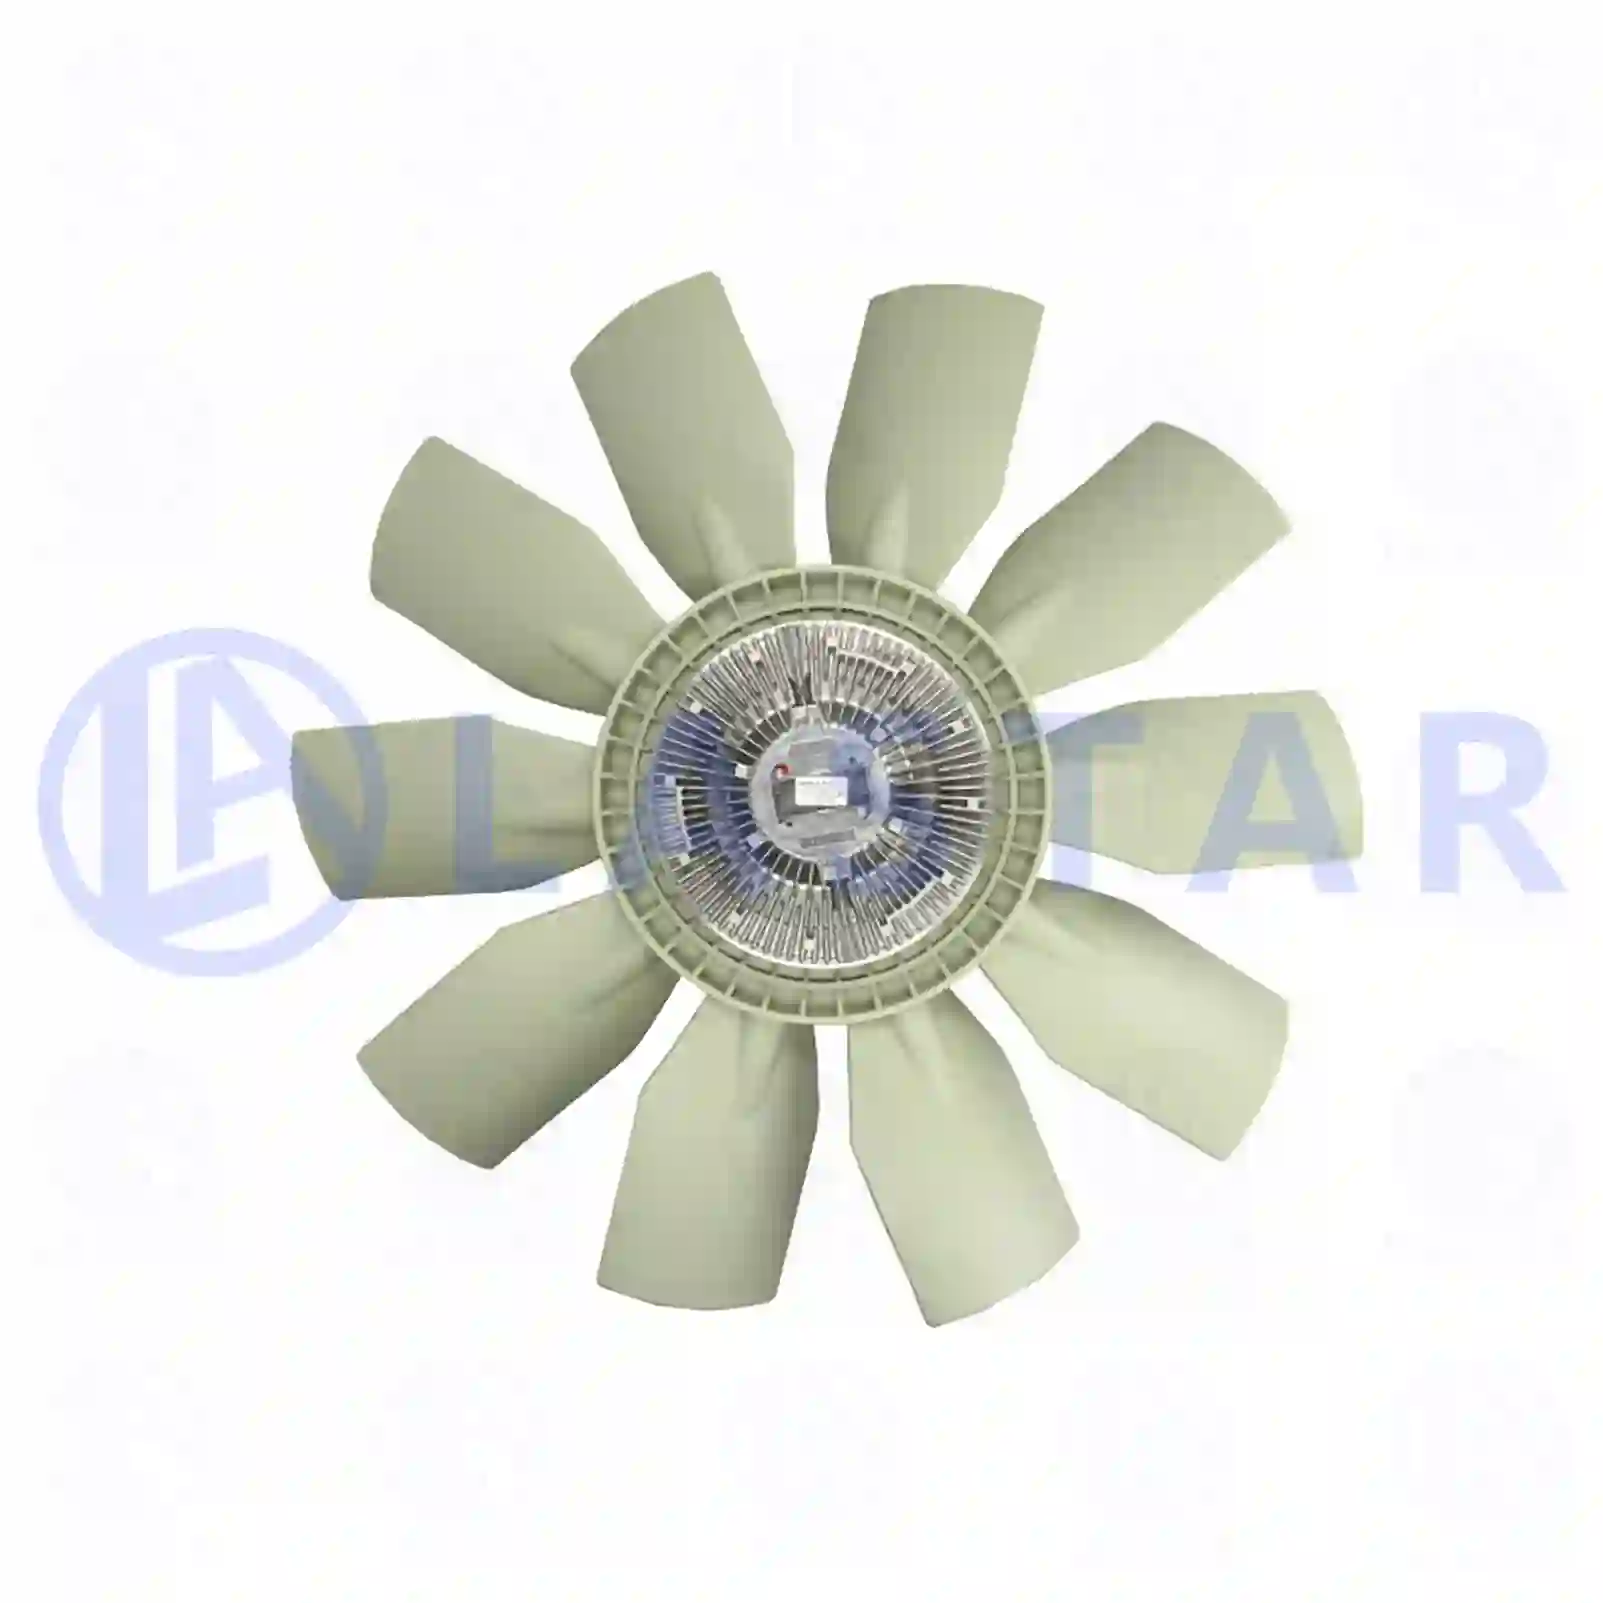 Fan with clutch, 77709169, 8113150, 8119150, 8149971 ||  77709169 Lastar Spare Part | Truck Spare Parts, Auotomotive Spare Parts Fan with clutch, 77709169, 8113150, 8119150, 8149971 ||  77709169 Lastar Spare Part | Truck Spare Parts, Auotomotive Spare Parts